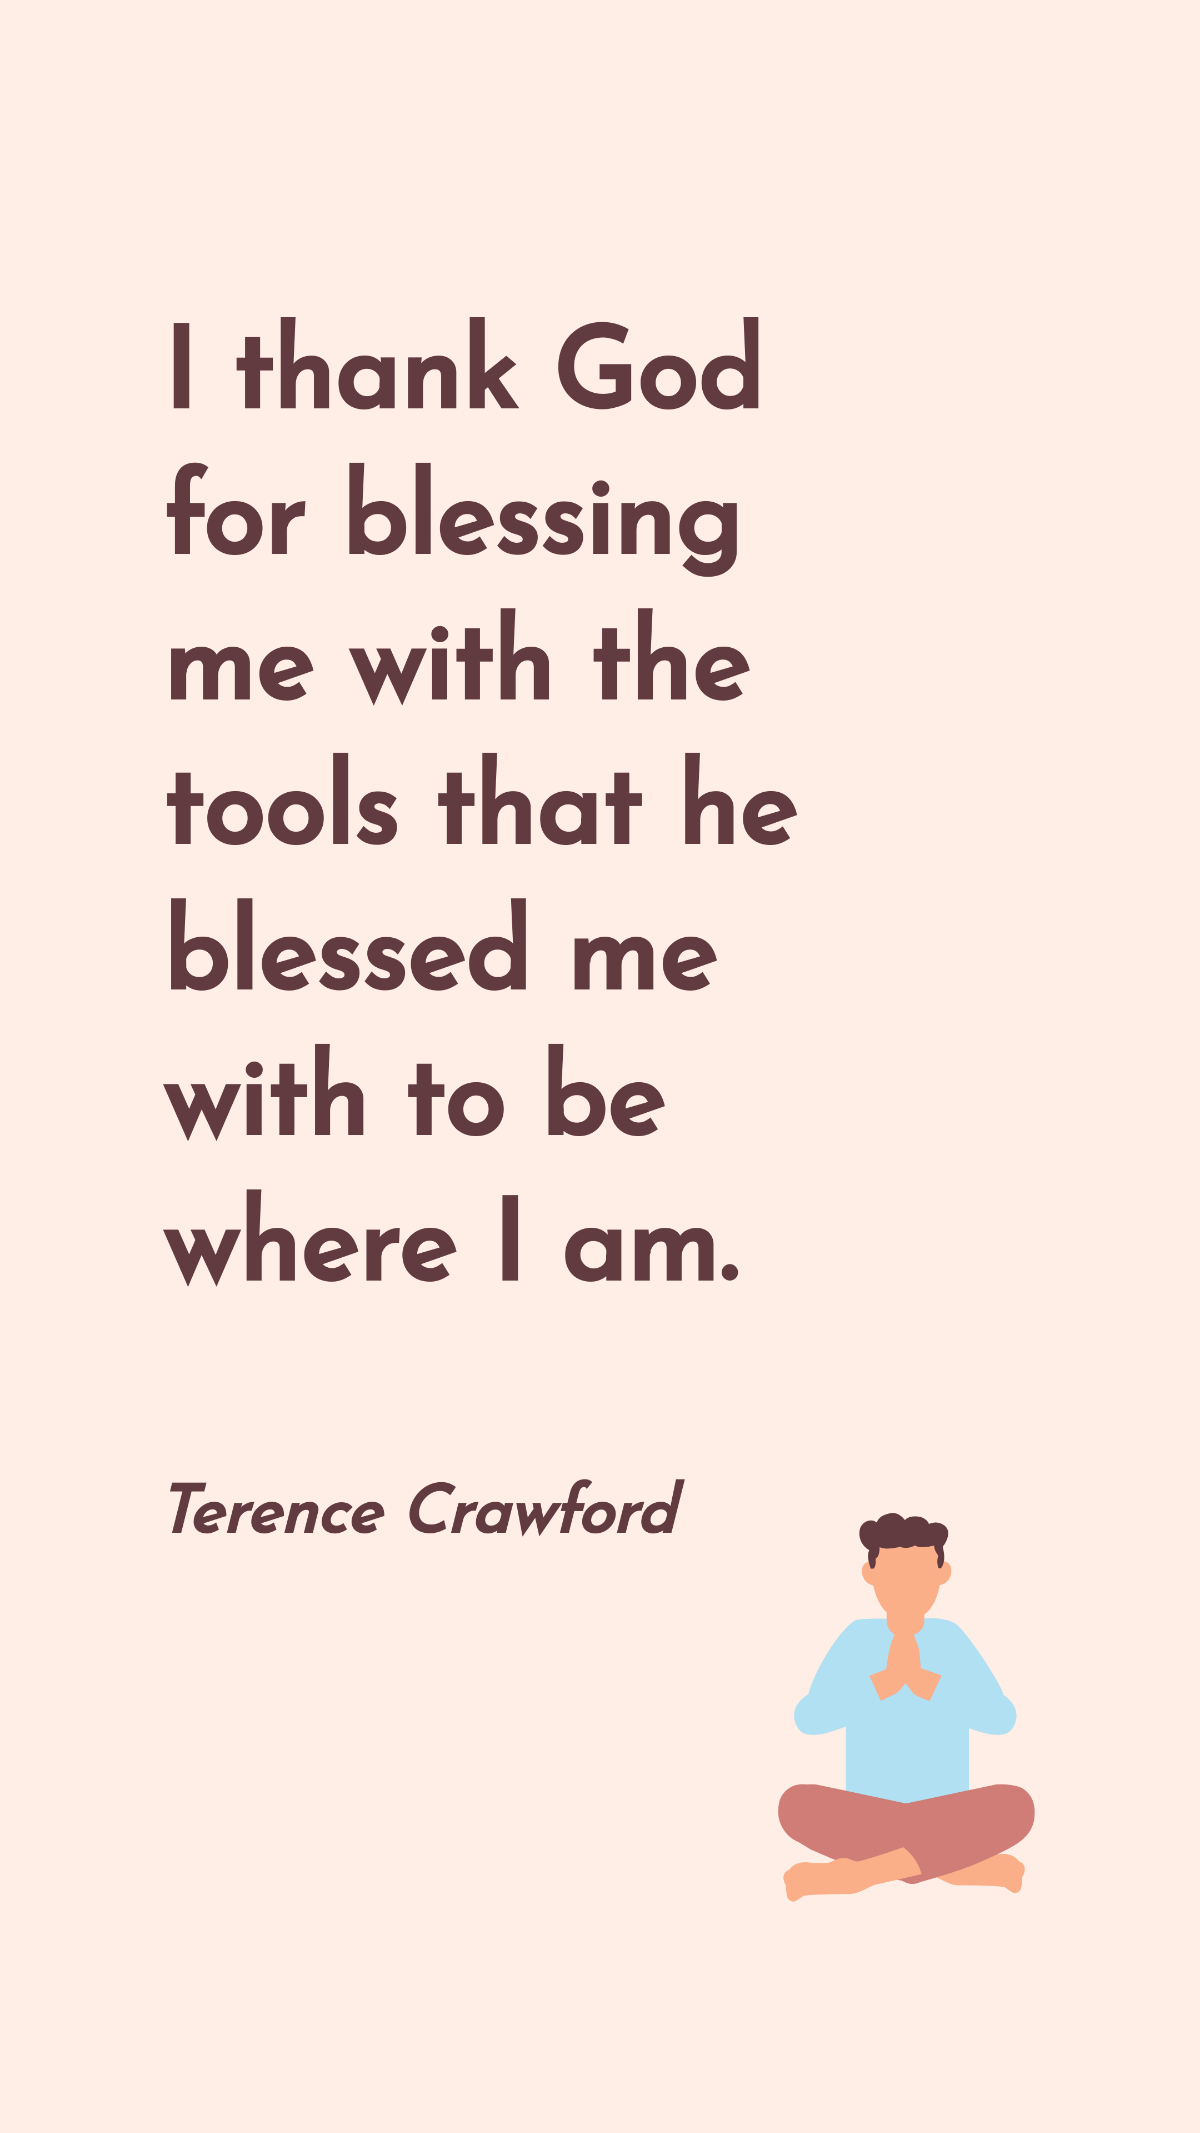 Terence Crawford - I thank God for blessing me with the tools that he blessed me with to be where I am.